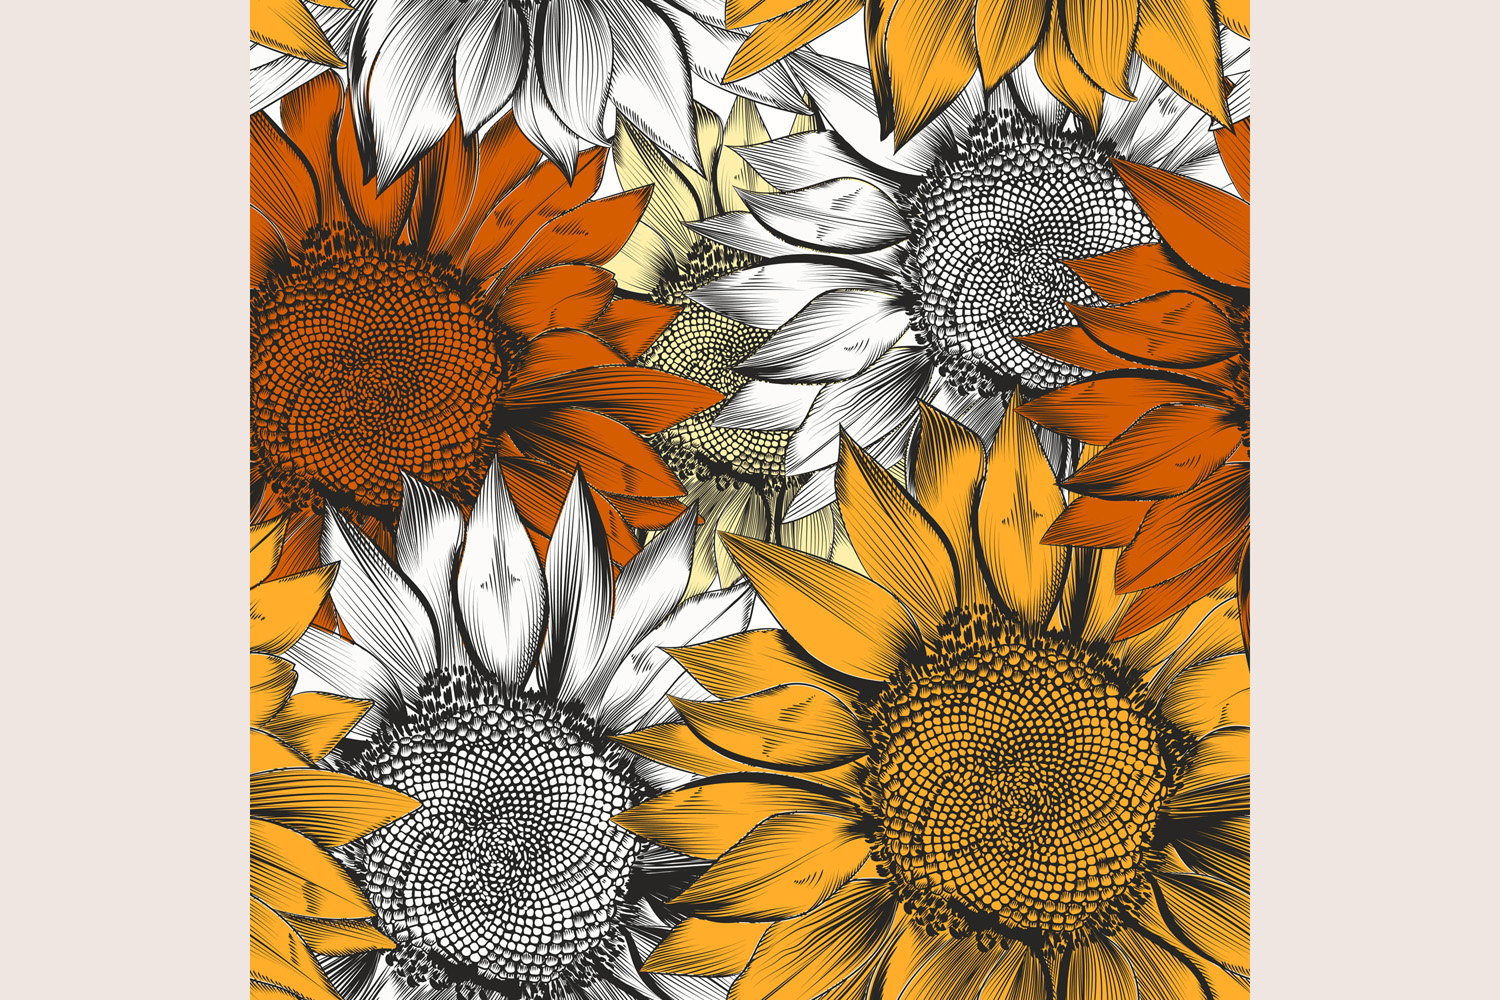 Beautiful vector pattern from hand drawn sunflowers